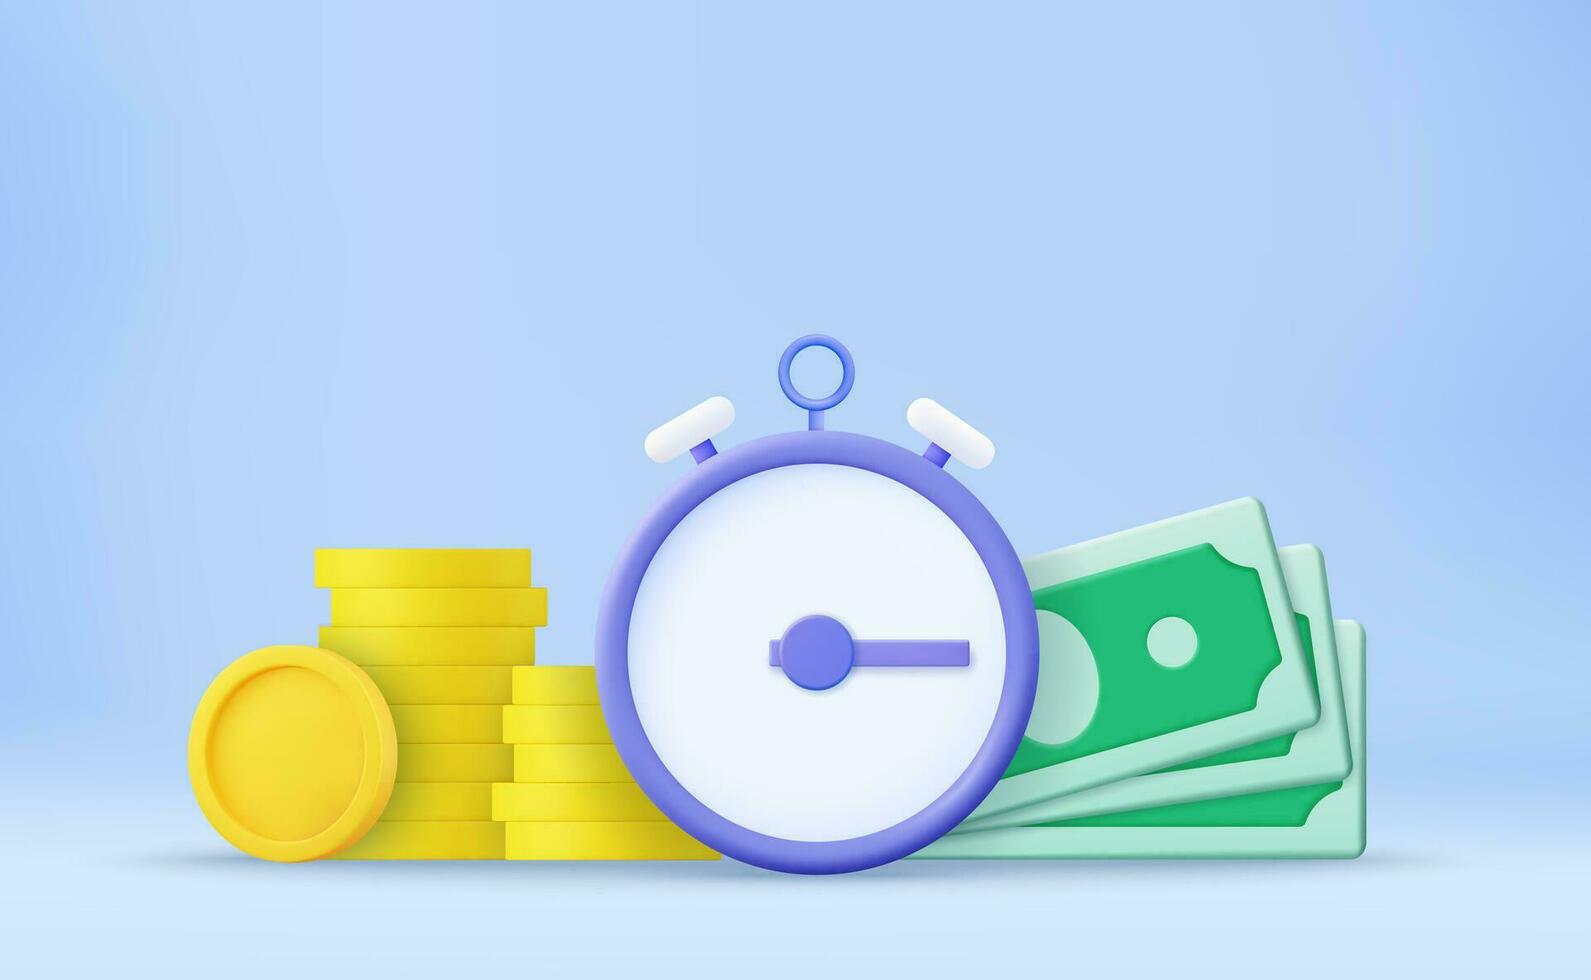 Time is money, business and finance concept. Quick payment, clock and cash, fast loan, easy credit. Time money saving. Timer and finance. Quick money. 3d rendering. Vector illustration